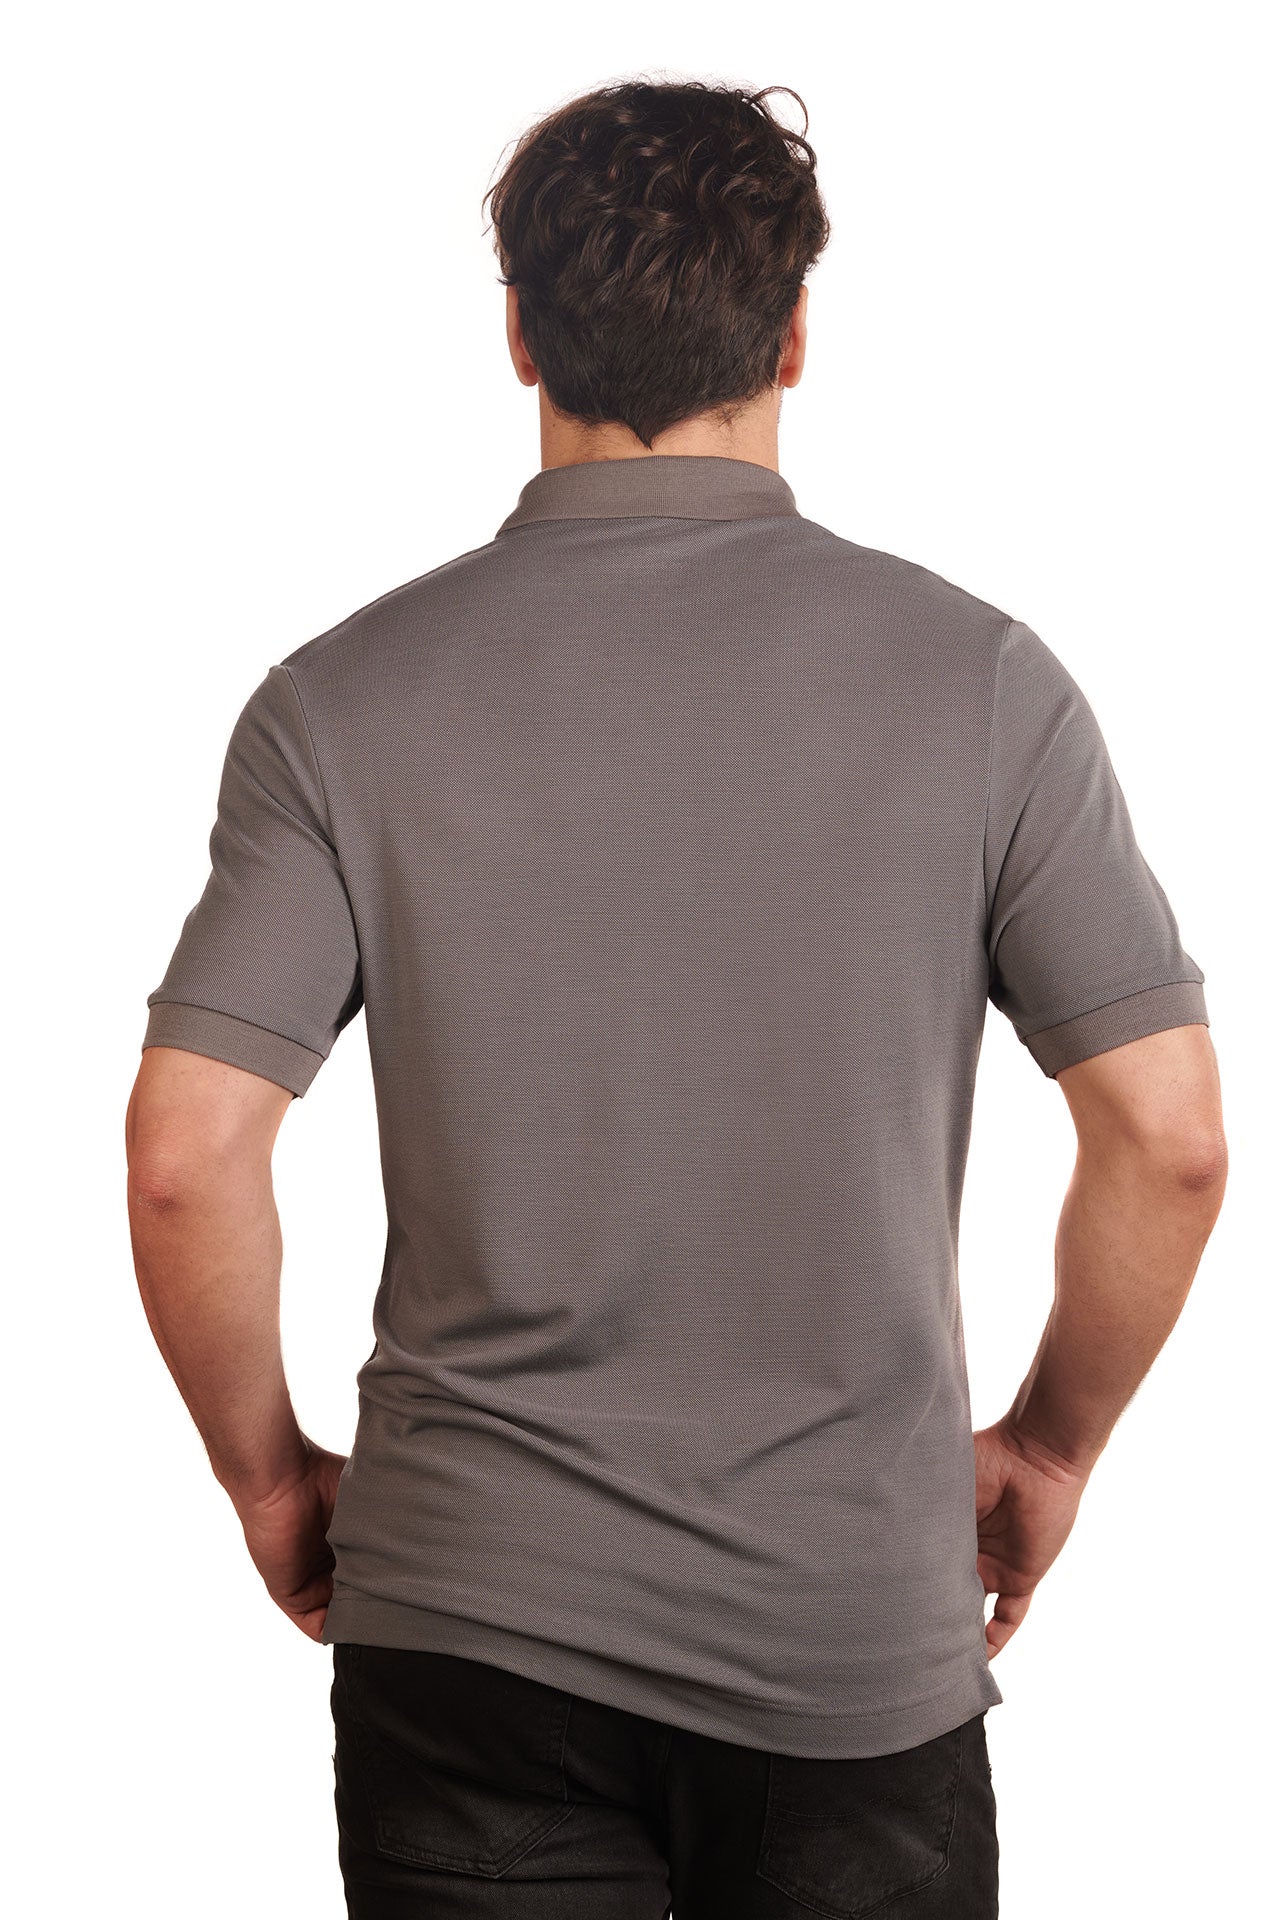 granite-grey-biodegradable-pure-merino-wool-golf-polo-shirt-for men-by-snöleo.-back-of-model-view.